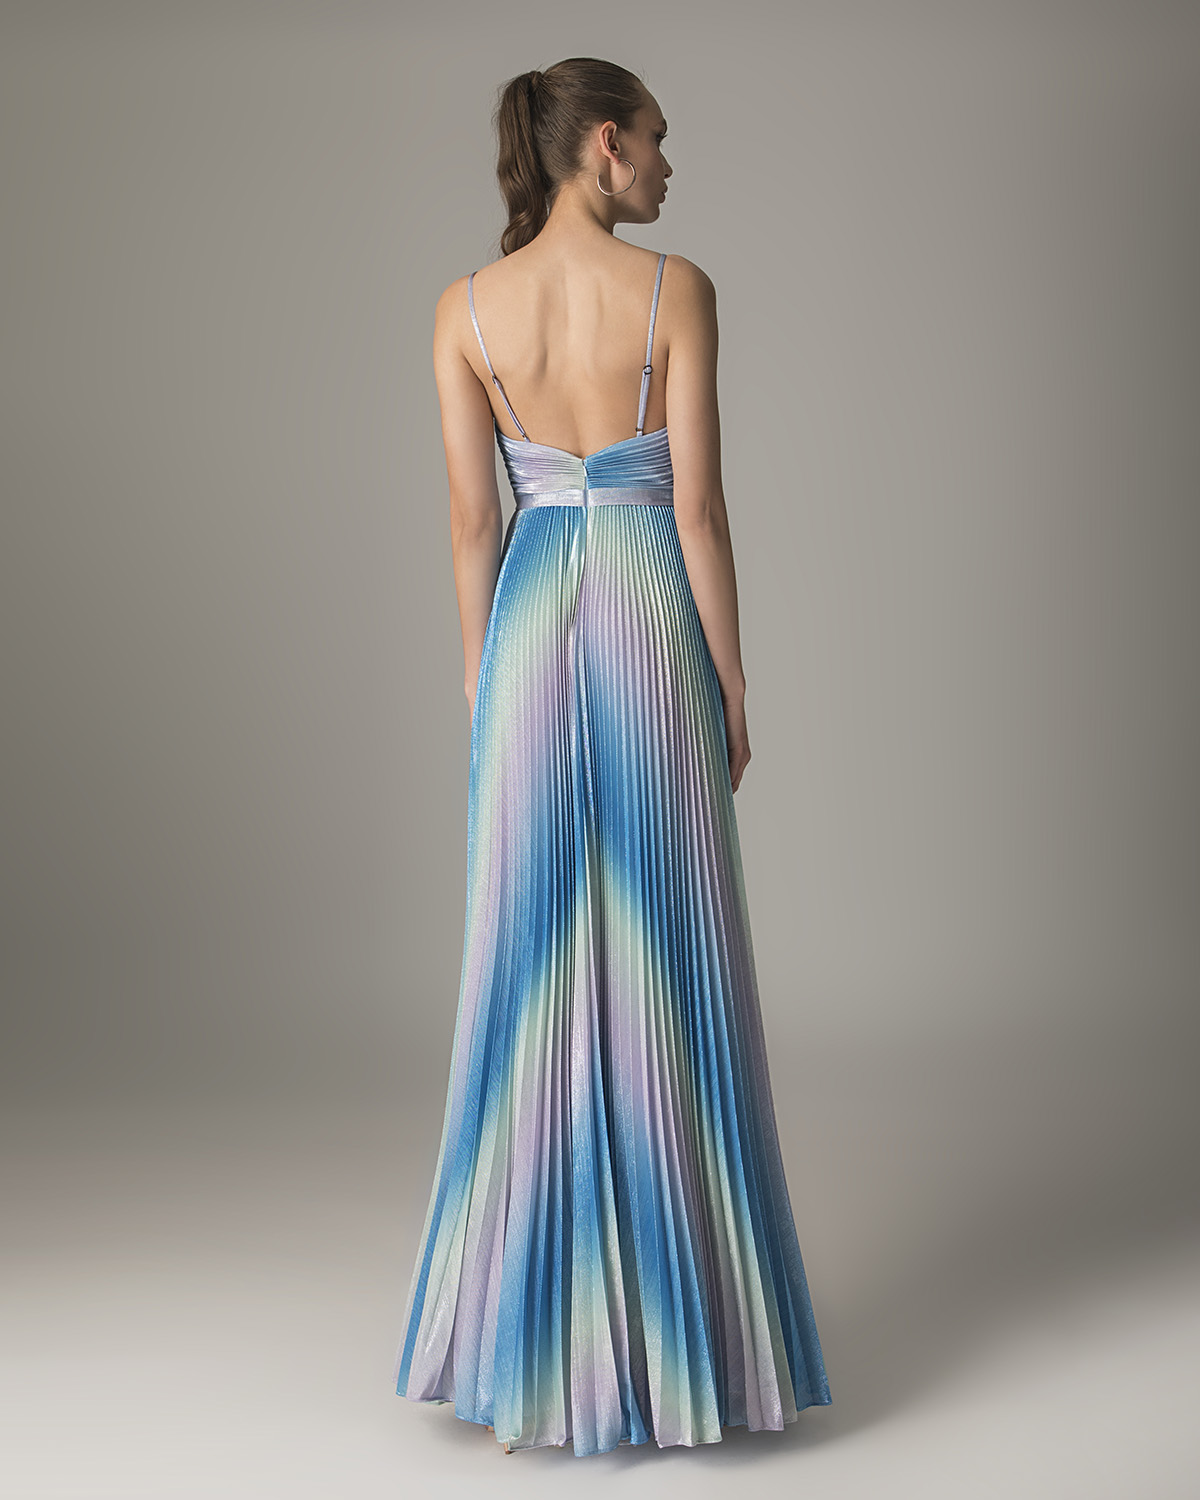 Cocktail Dresses / Long pleated cocktail dress with shining fabric